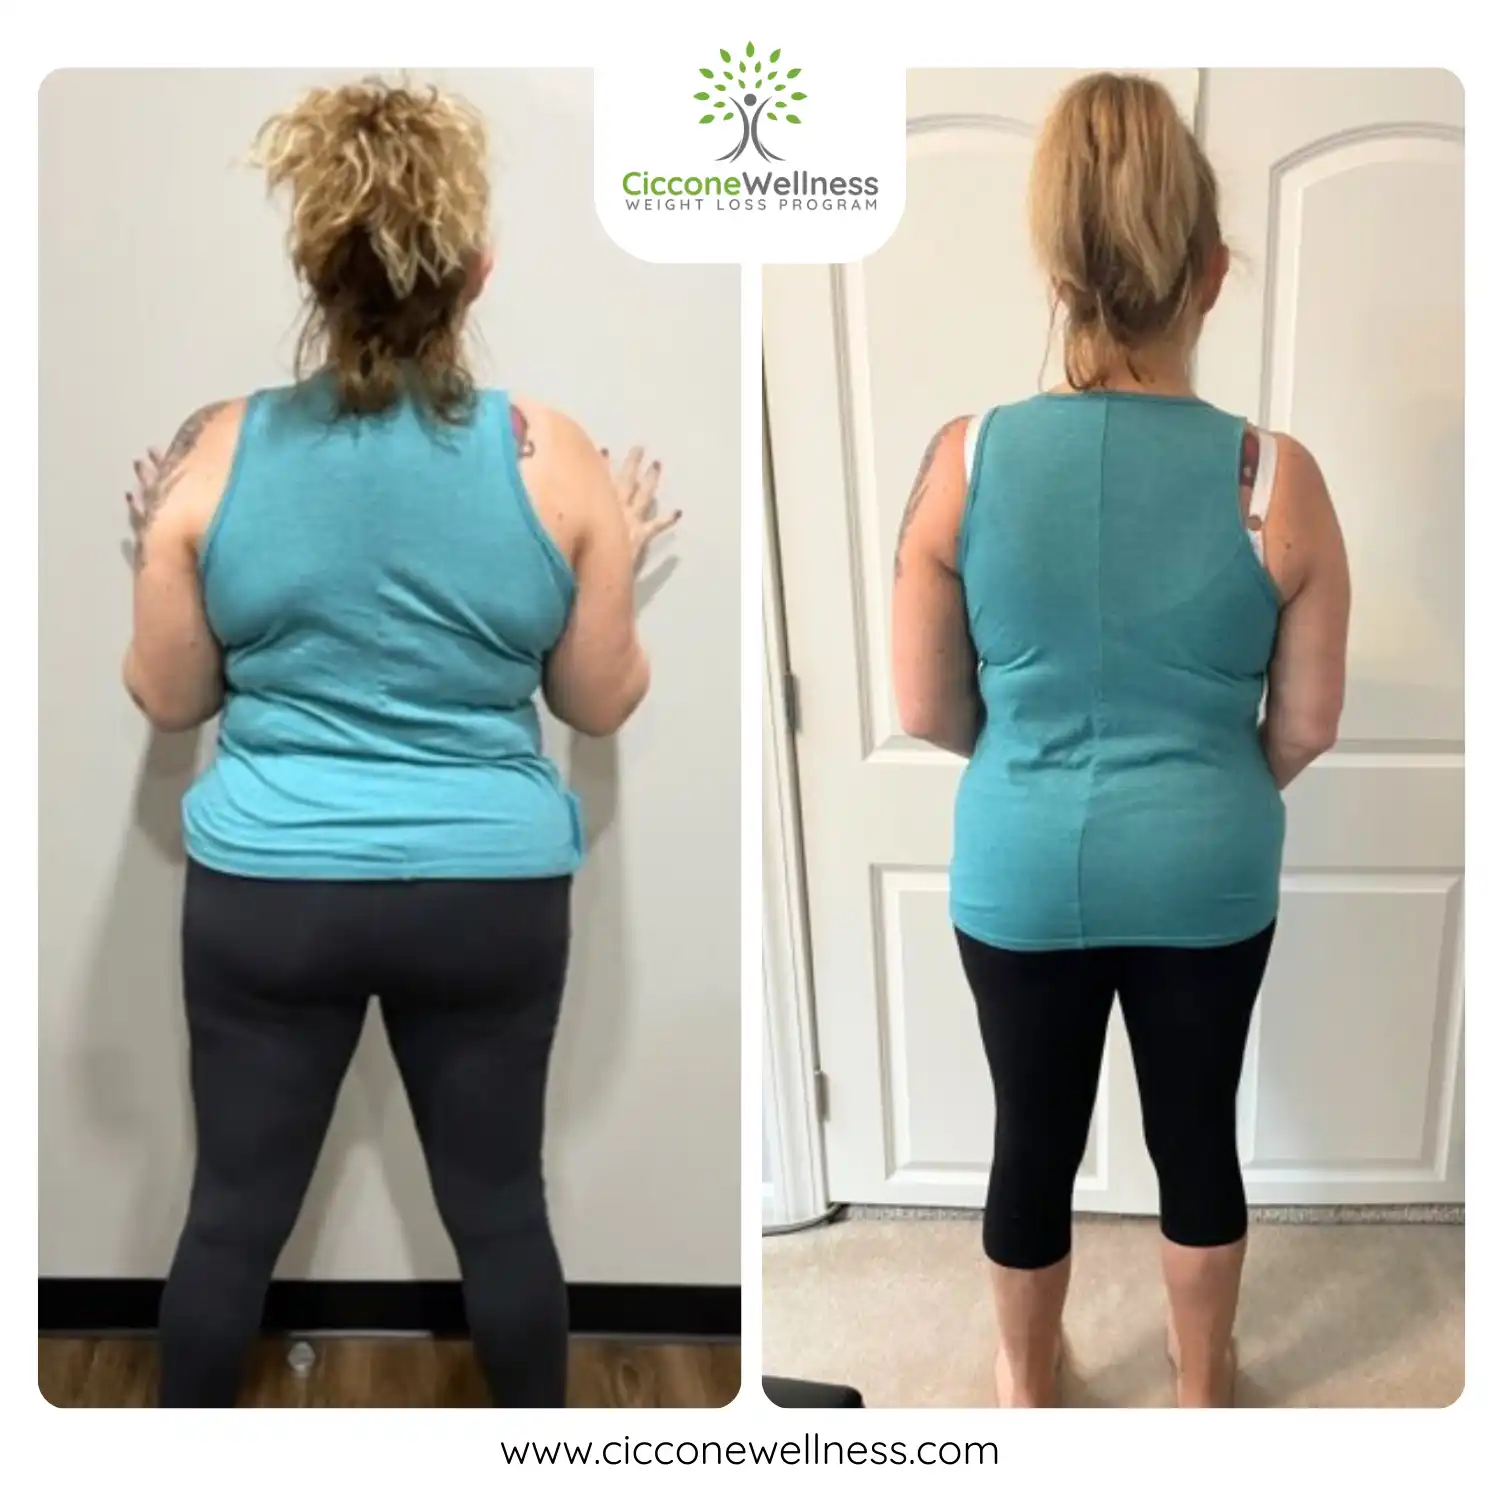 Amy before and after weight loss back view